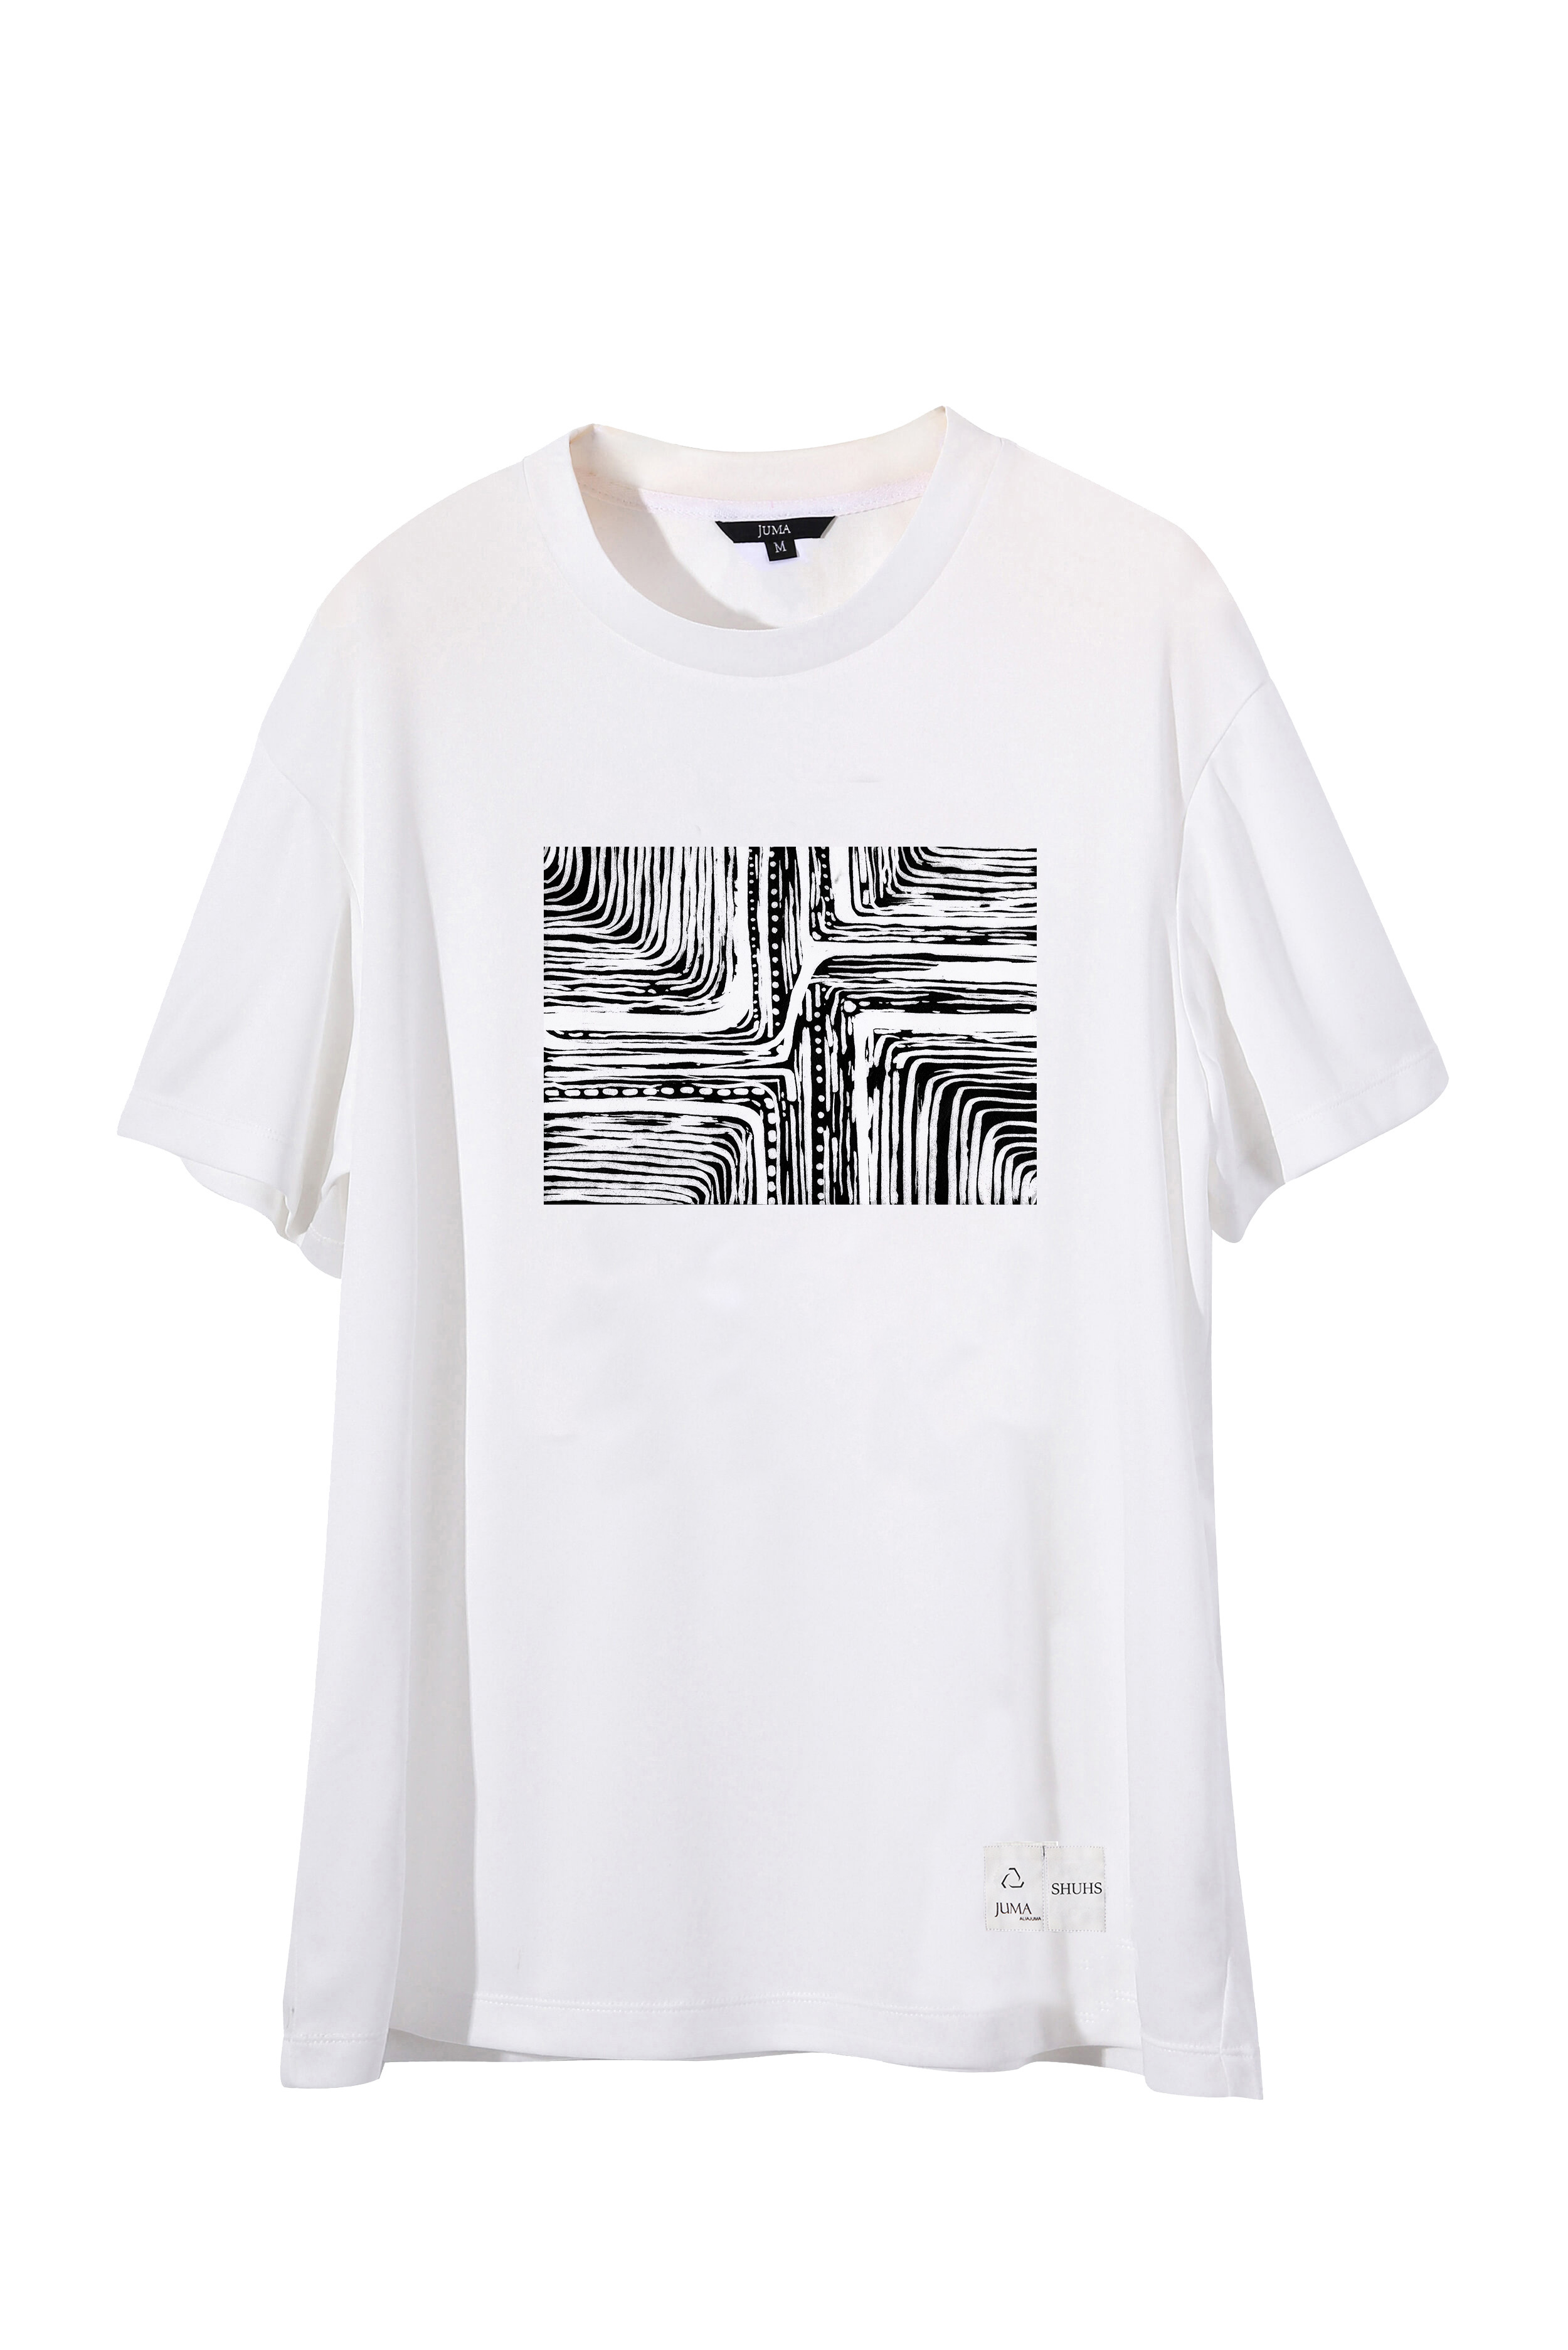 Recharge 印花 2 件 T 恤 - 4 个再生水瓶 - 奶油｜Recharge Print 2 T-Shirt - 4 Recycled Water Bottles-Cream